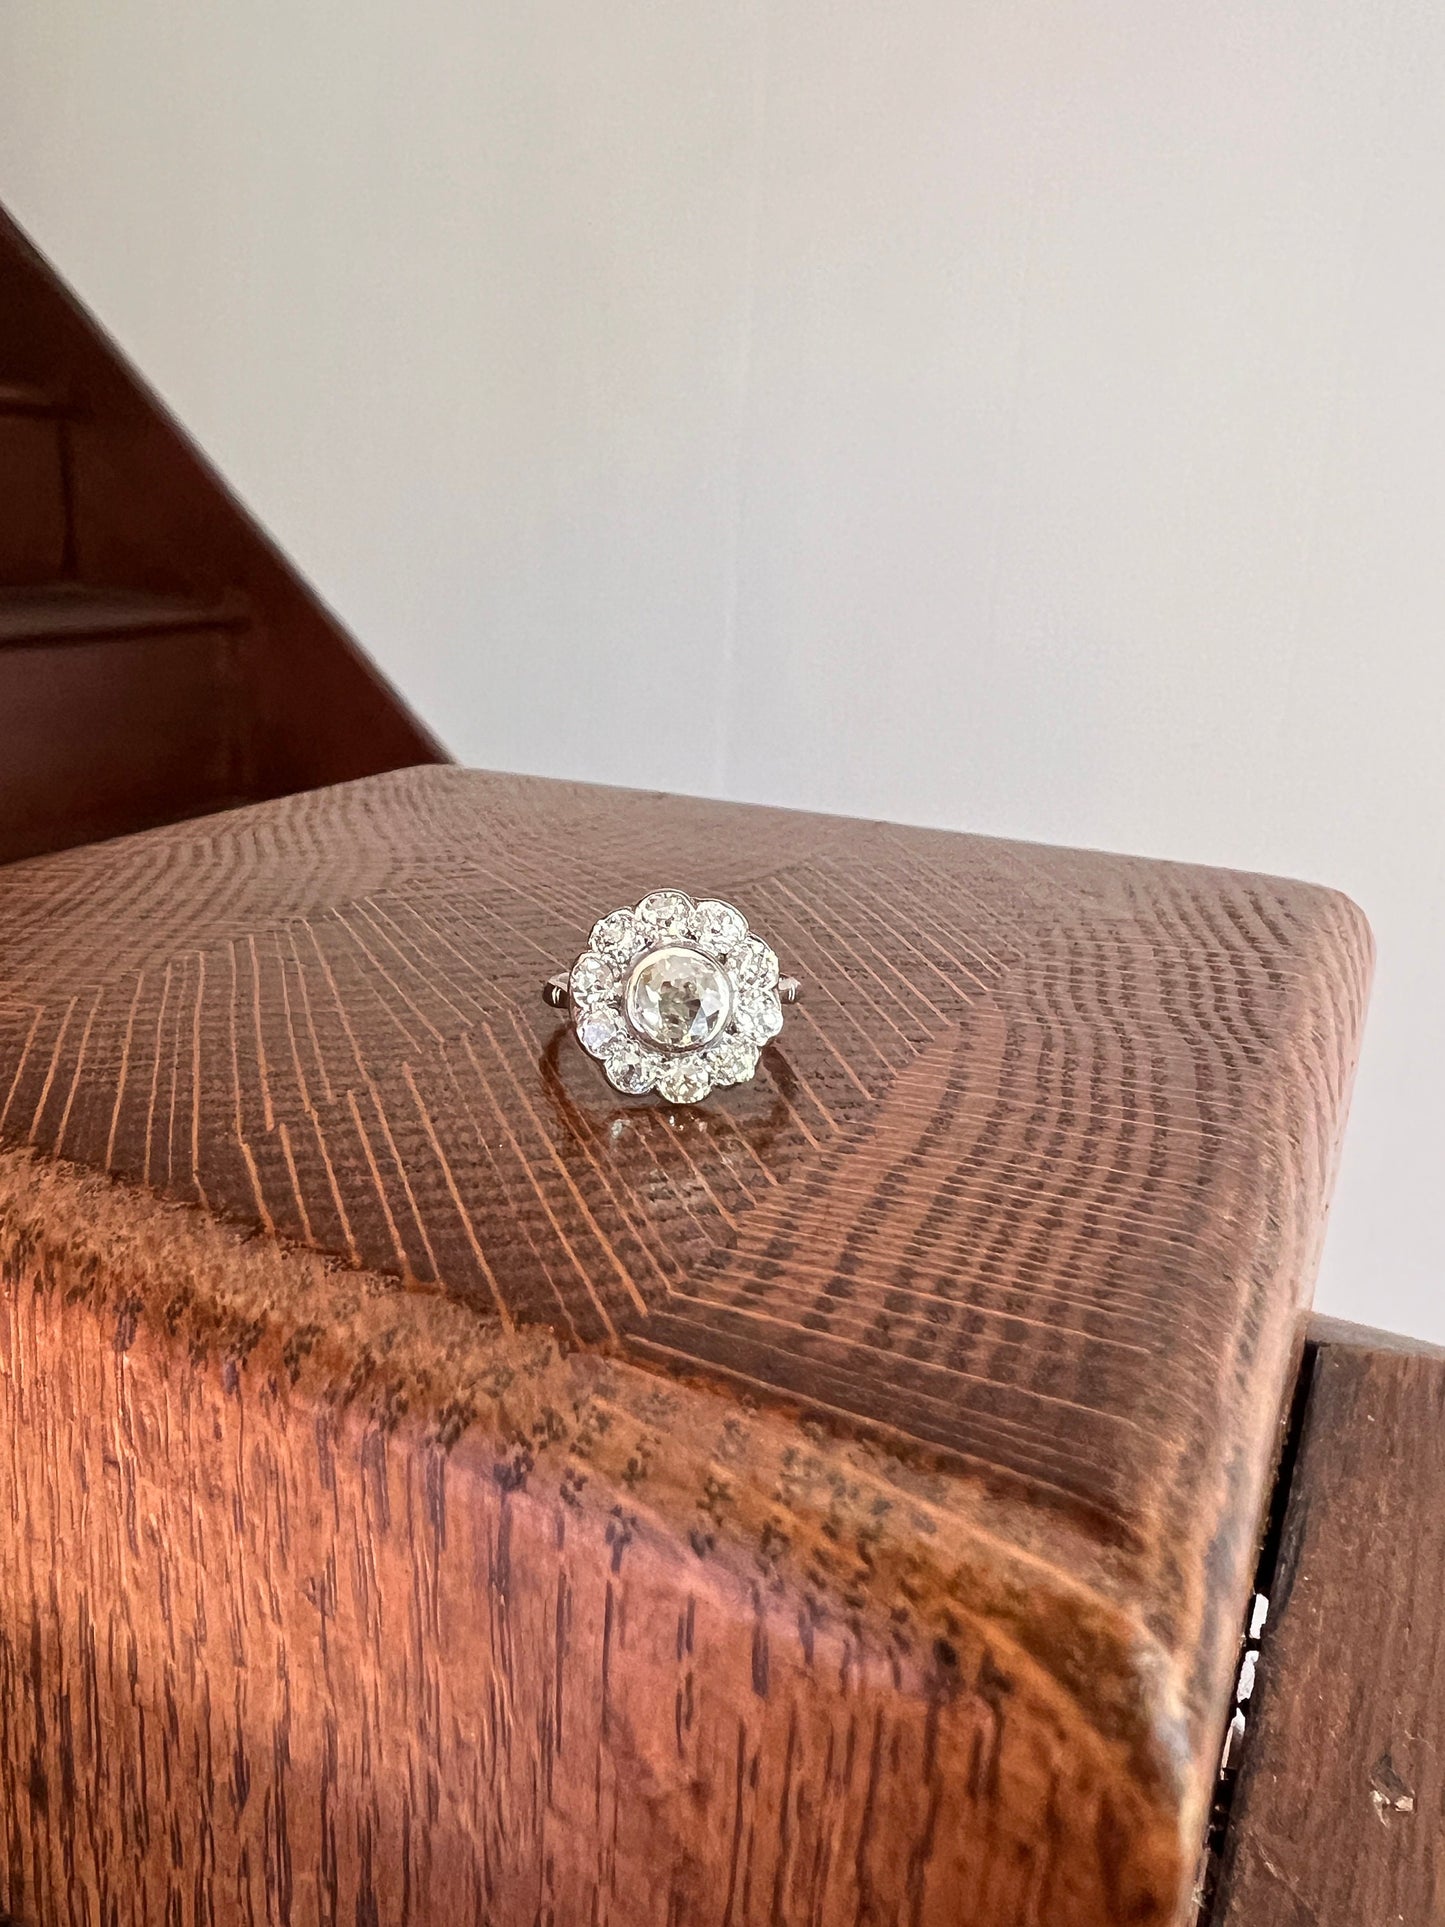 Antique Daisy CLUSTER Ring 1.3 CARAT Old Mine Cut DIAMOND 18k White Gold Floral Scallop Stacker Art Deco Romantic Gift OmC Engagement 1.3Ctw